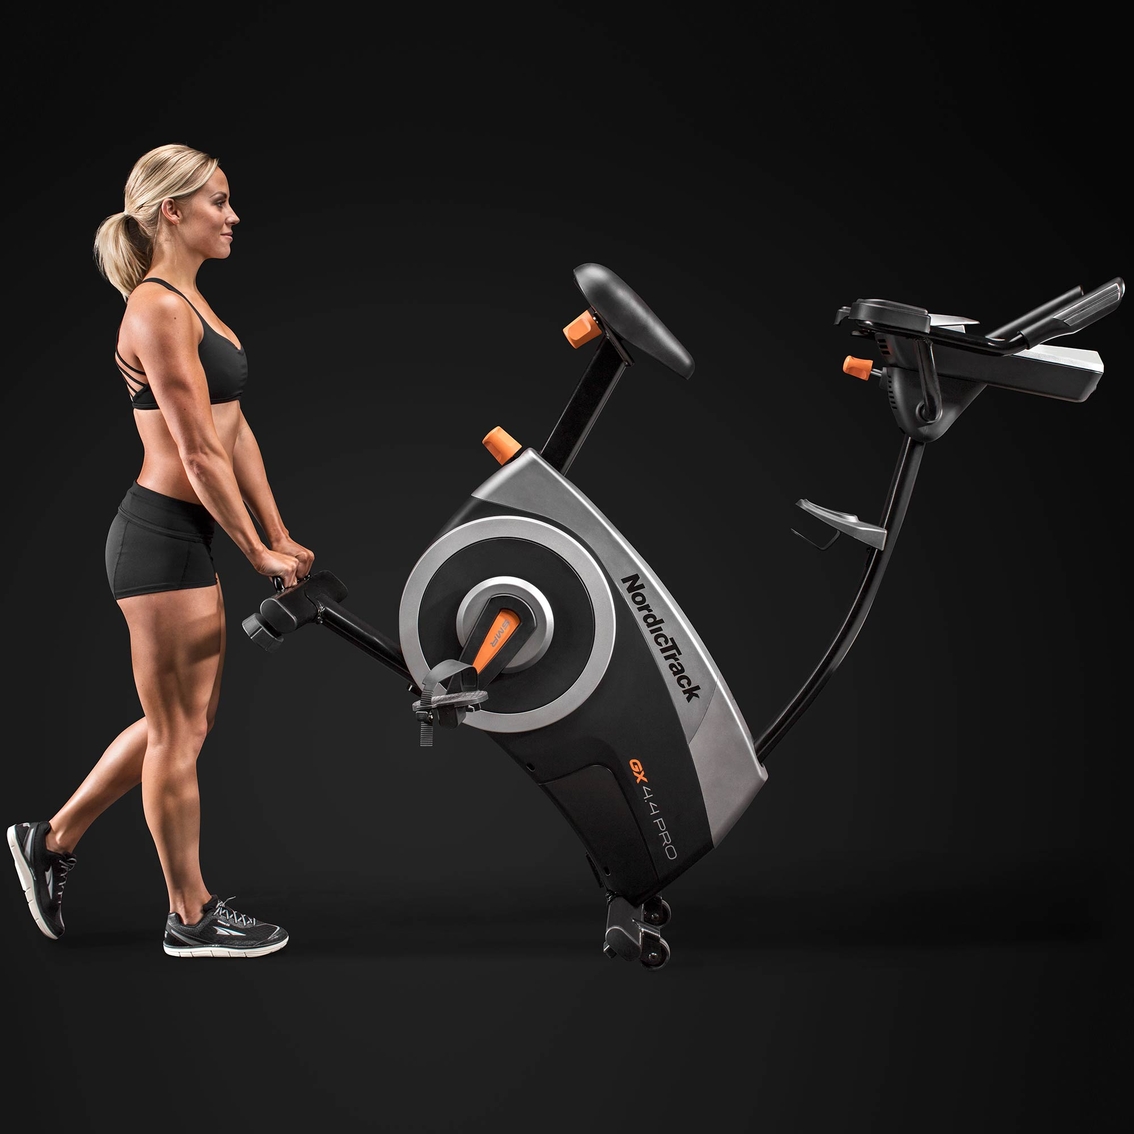 NordicTrack GX 4.4 Pro Exercise Bike - Image 4 of 4